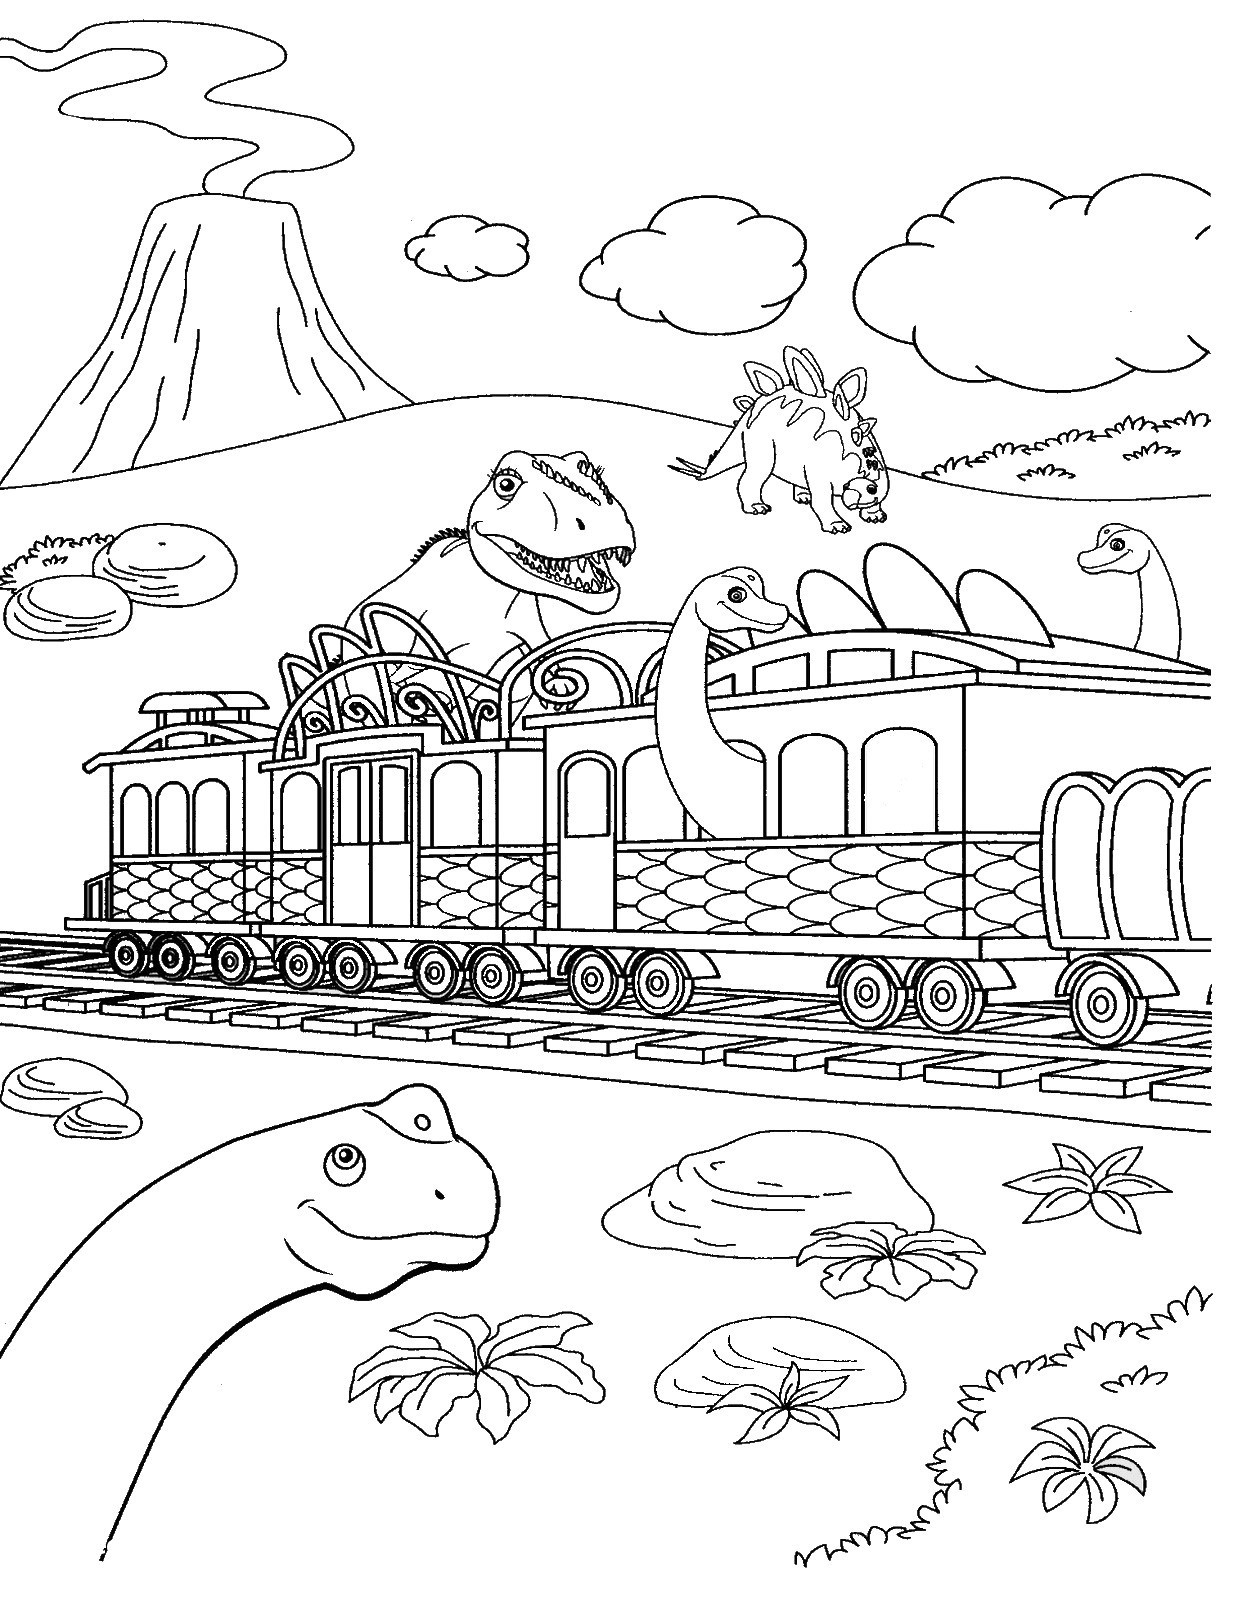 27+ Brilliant Image of Dinosaur Train Coloring Pages ...